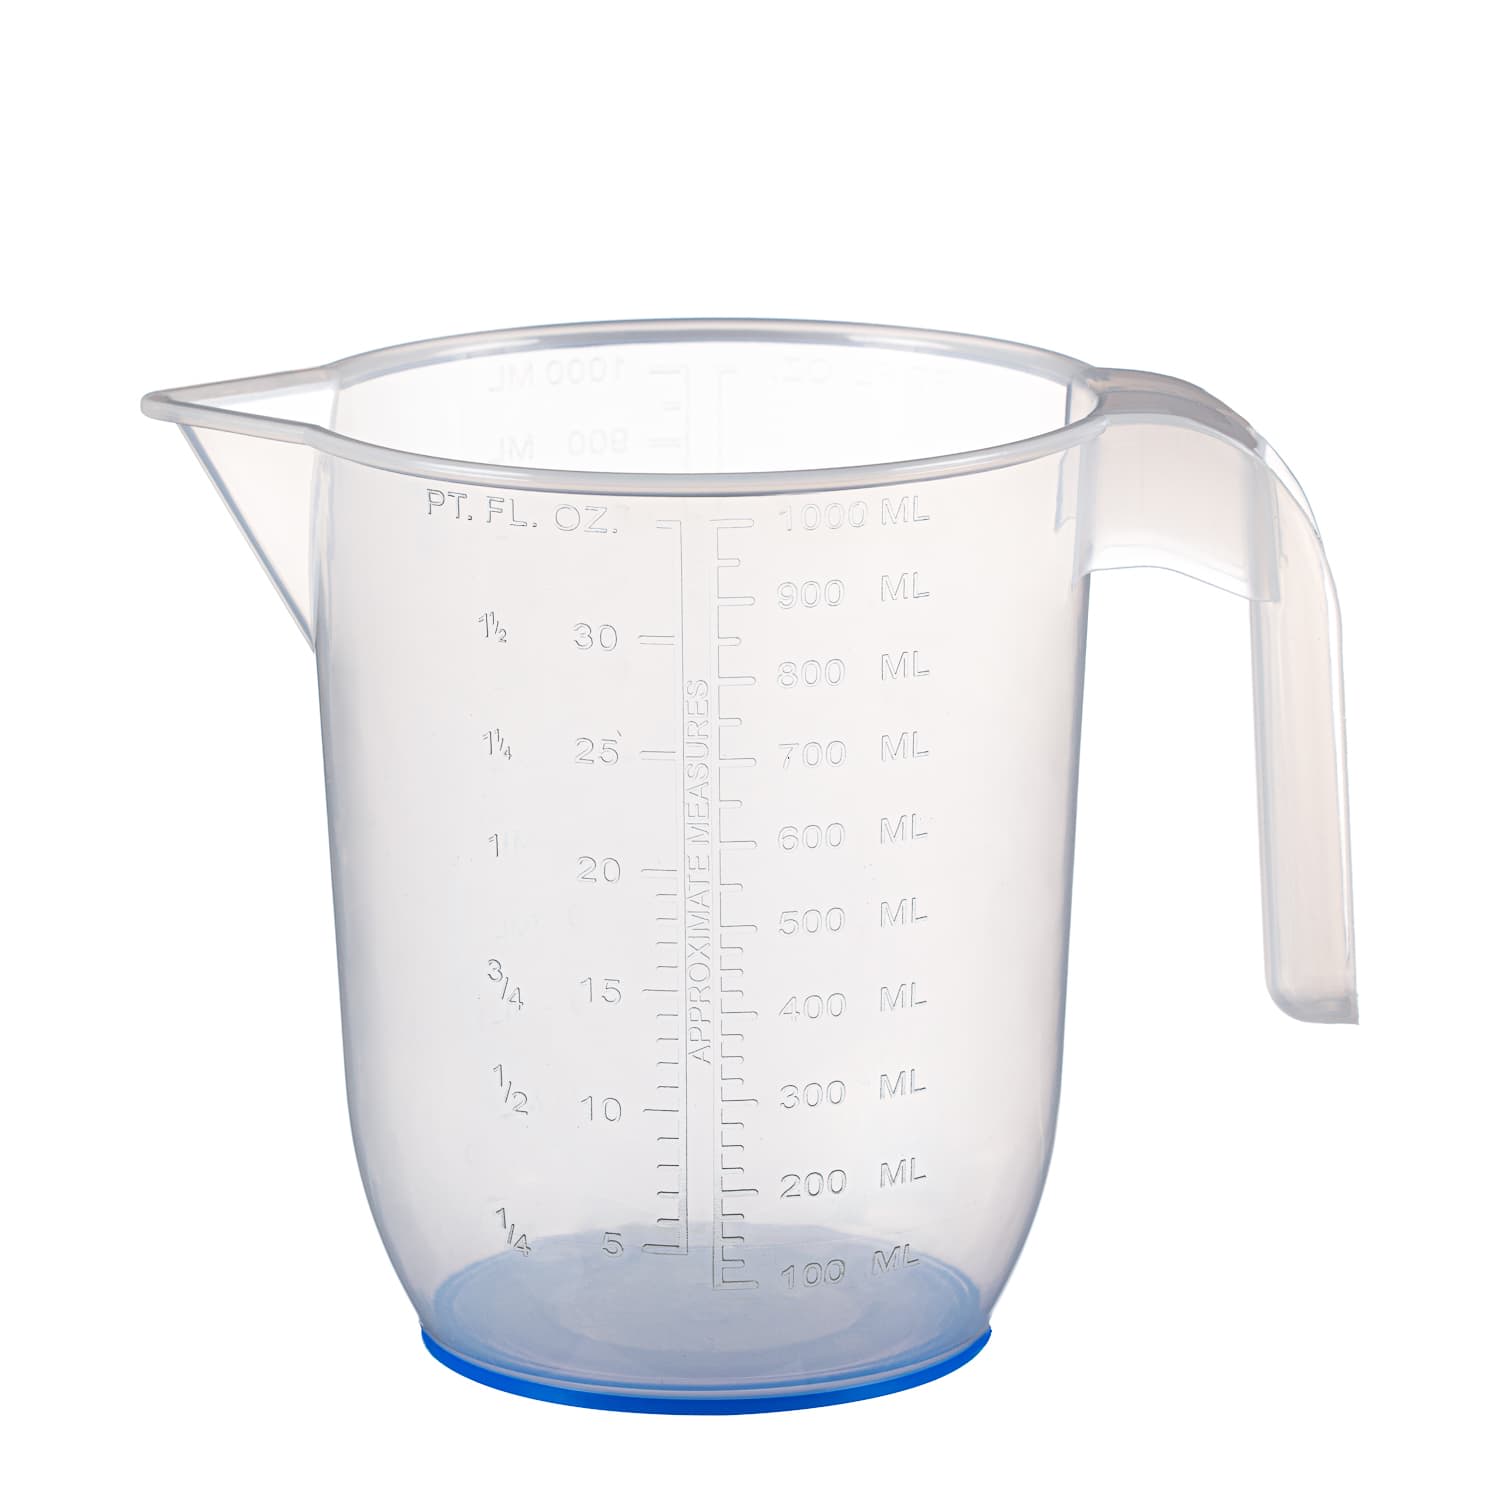 https://www.bmstores.co.uk/images/hpcProductImage/imgSource/302094-simply-everyday-1-litre-measuring-jug.jpg